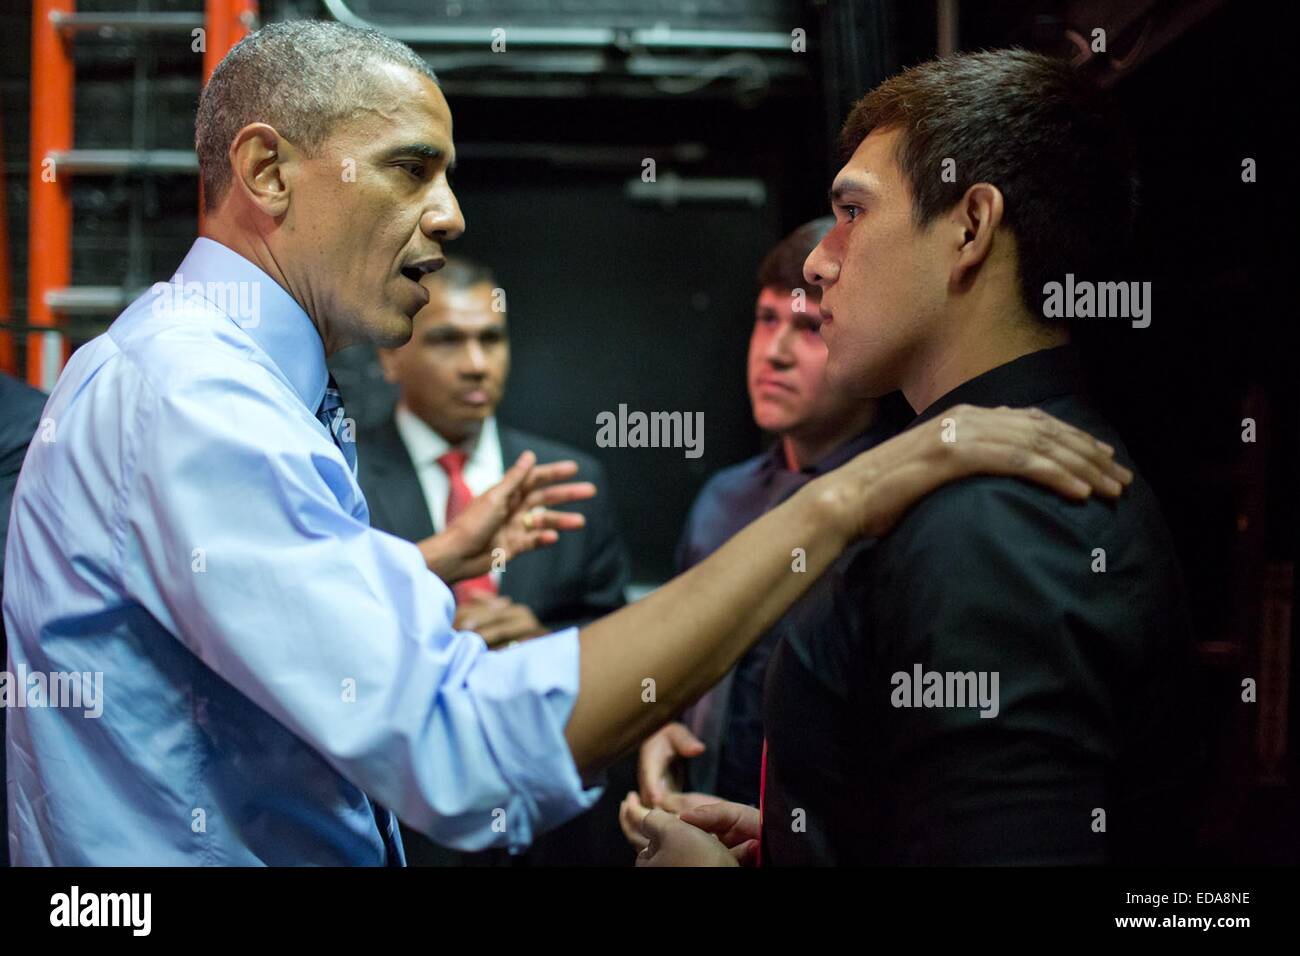 US President Barack Obama talks with two young men who heckled him during a speech on the economy July 10, 2014 in Austin, Texas. Obama spoke to the young men backstage to discuss their comments on immigration reform following their disruptions. Stock Photo